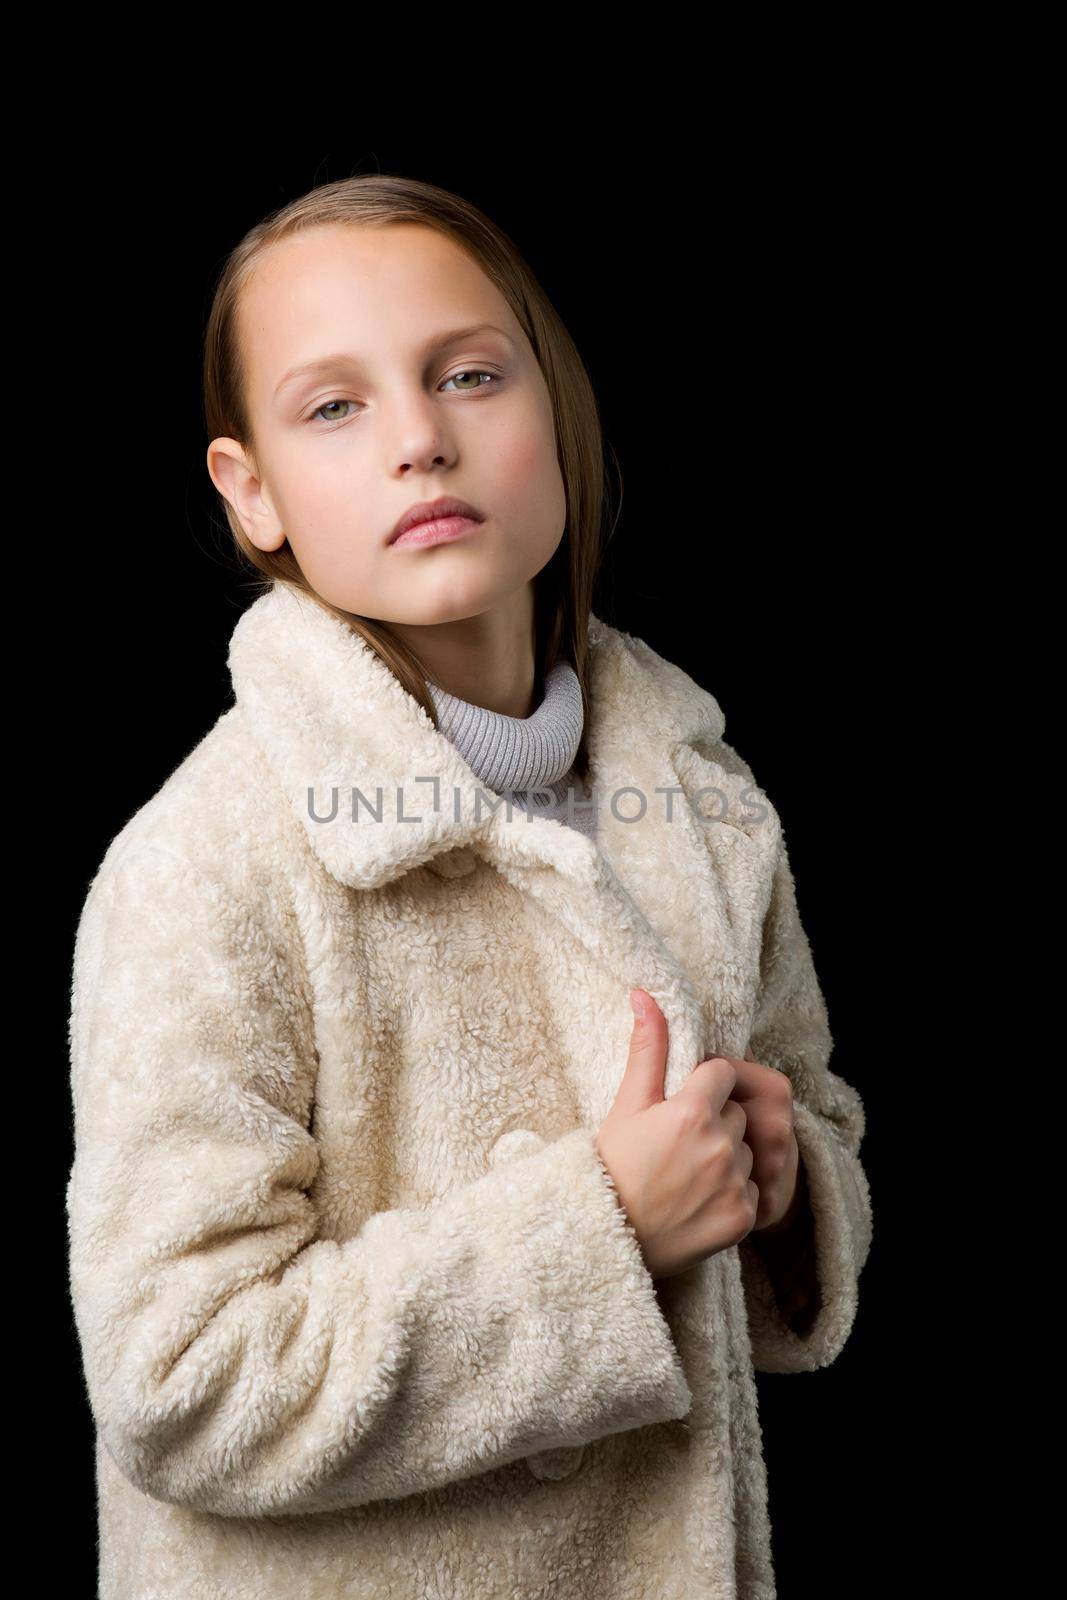 Close up portrait of stylish preteen girl. Beautiful fashionable blonde girl wearing beige faux fur coat posing against black background. Trendy child dressed fashion outfit